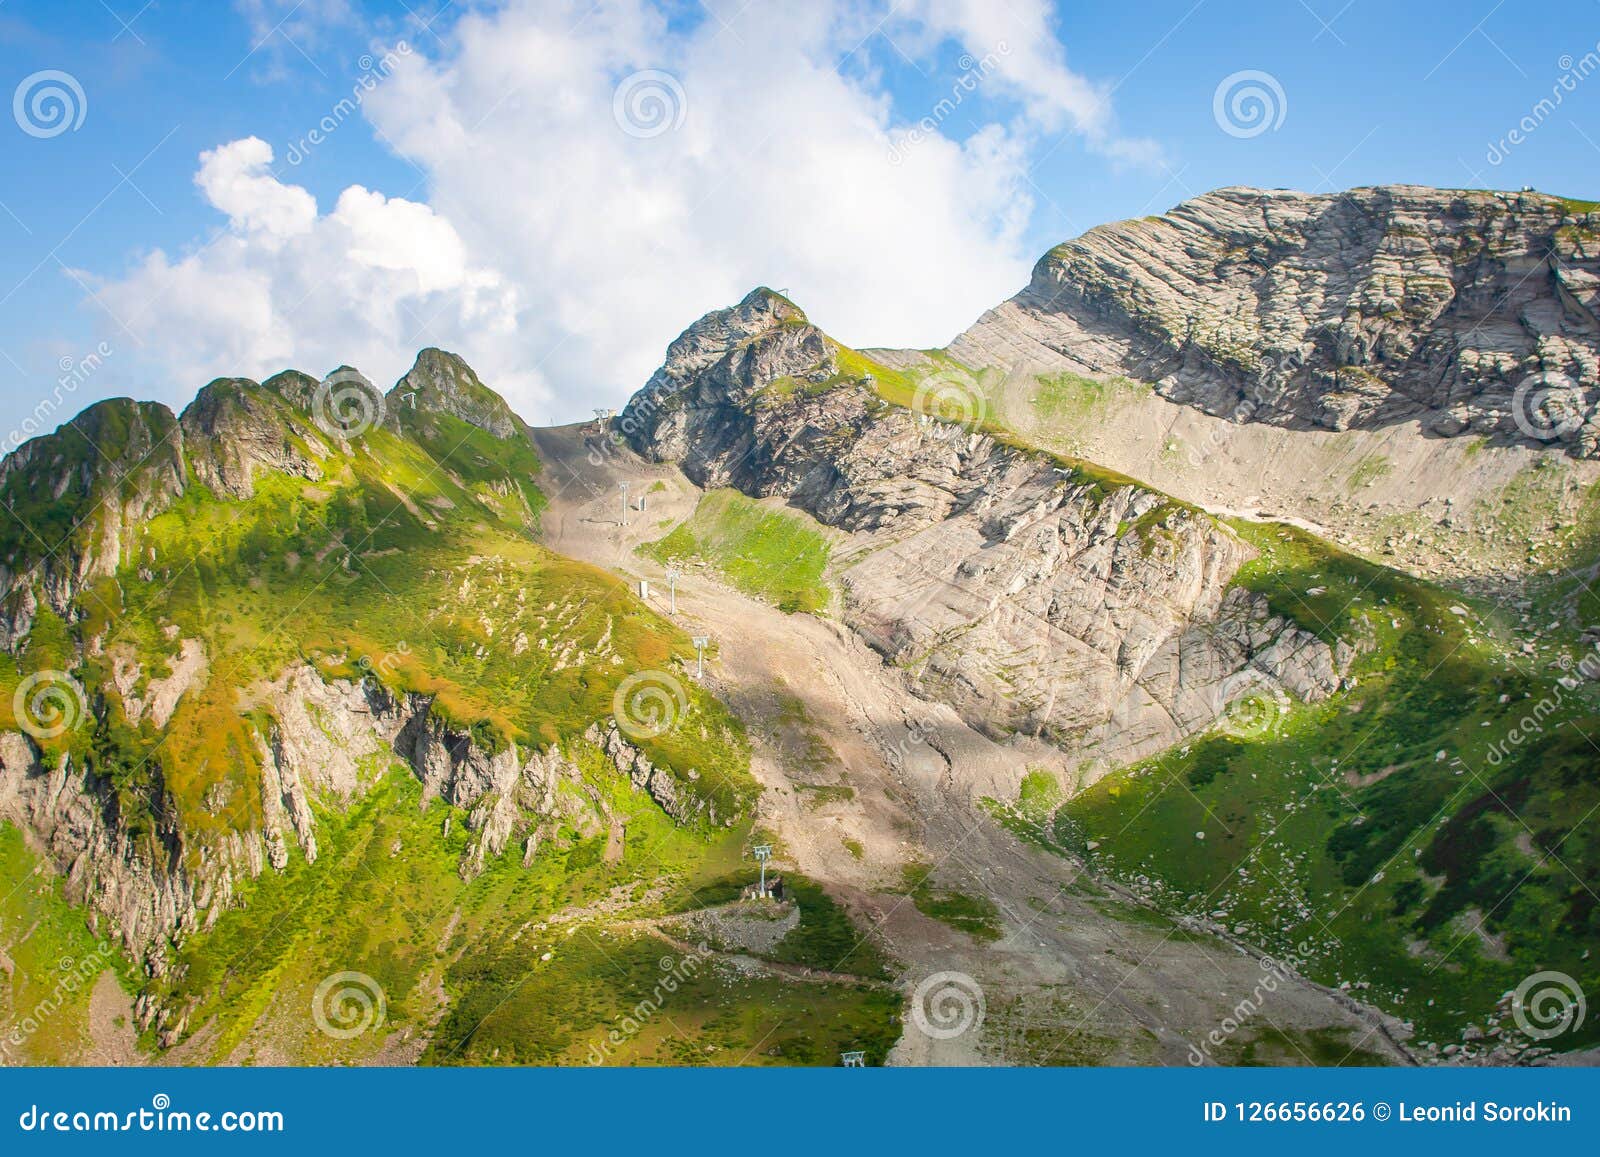 Green Mountain Covered with Grass on the Blue Sky Background. Stock ...